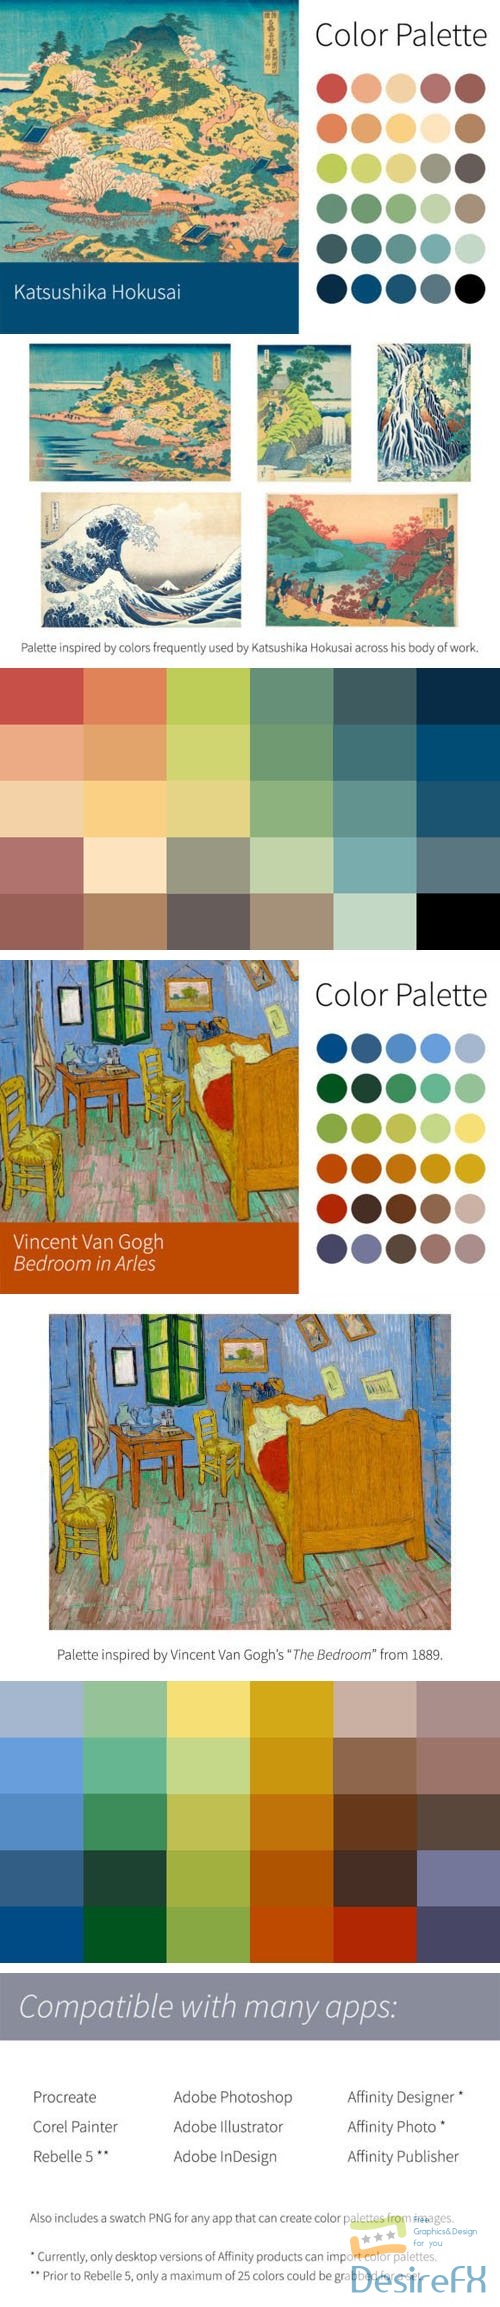 Color Palettes Pack - 60 Swatches for Adobe/Procreate/Corel Painter/Affinity/Rebelle/Fresco